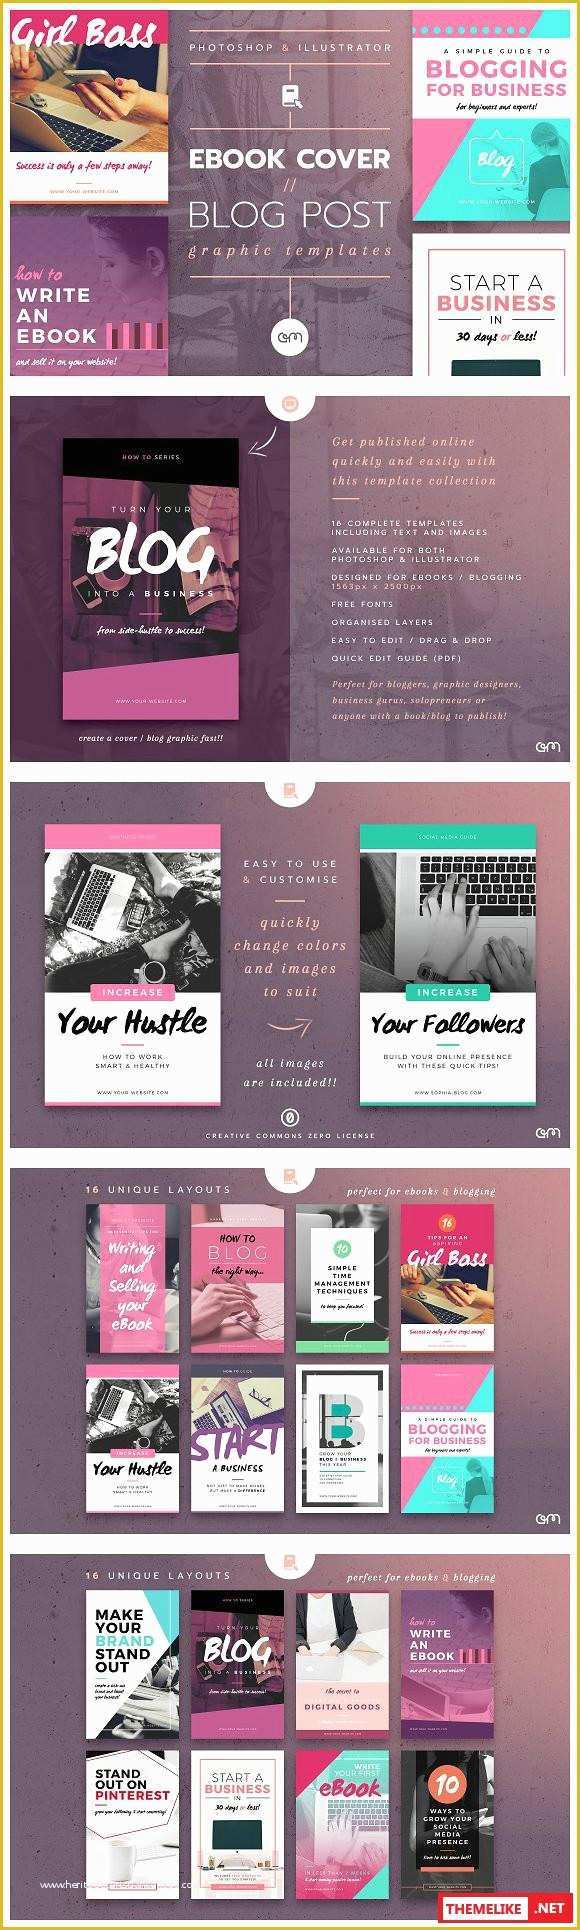 Free Ebook Cover Templates for Photoshop Of Creativemarket Ebook Cover Blog Post Graphics